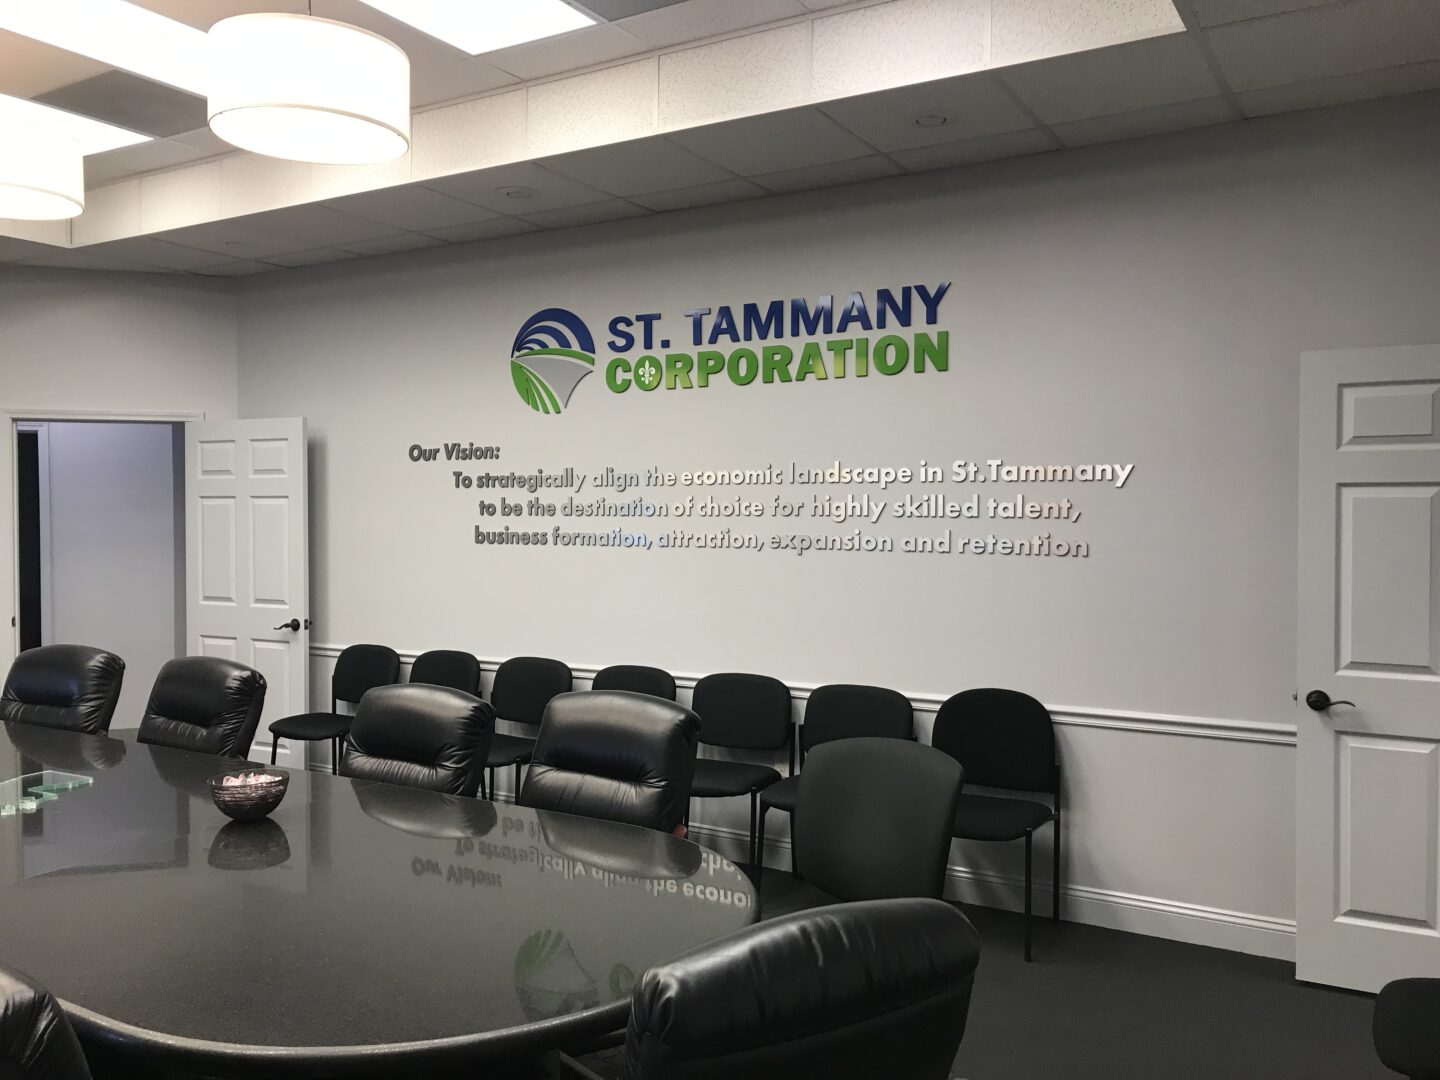 Interior Wall Signage with Vision Statement St. Tammany Corporation Architectural Sign